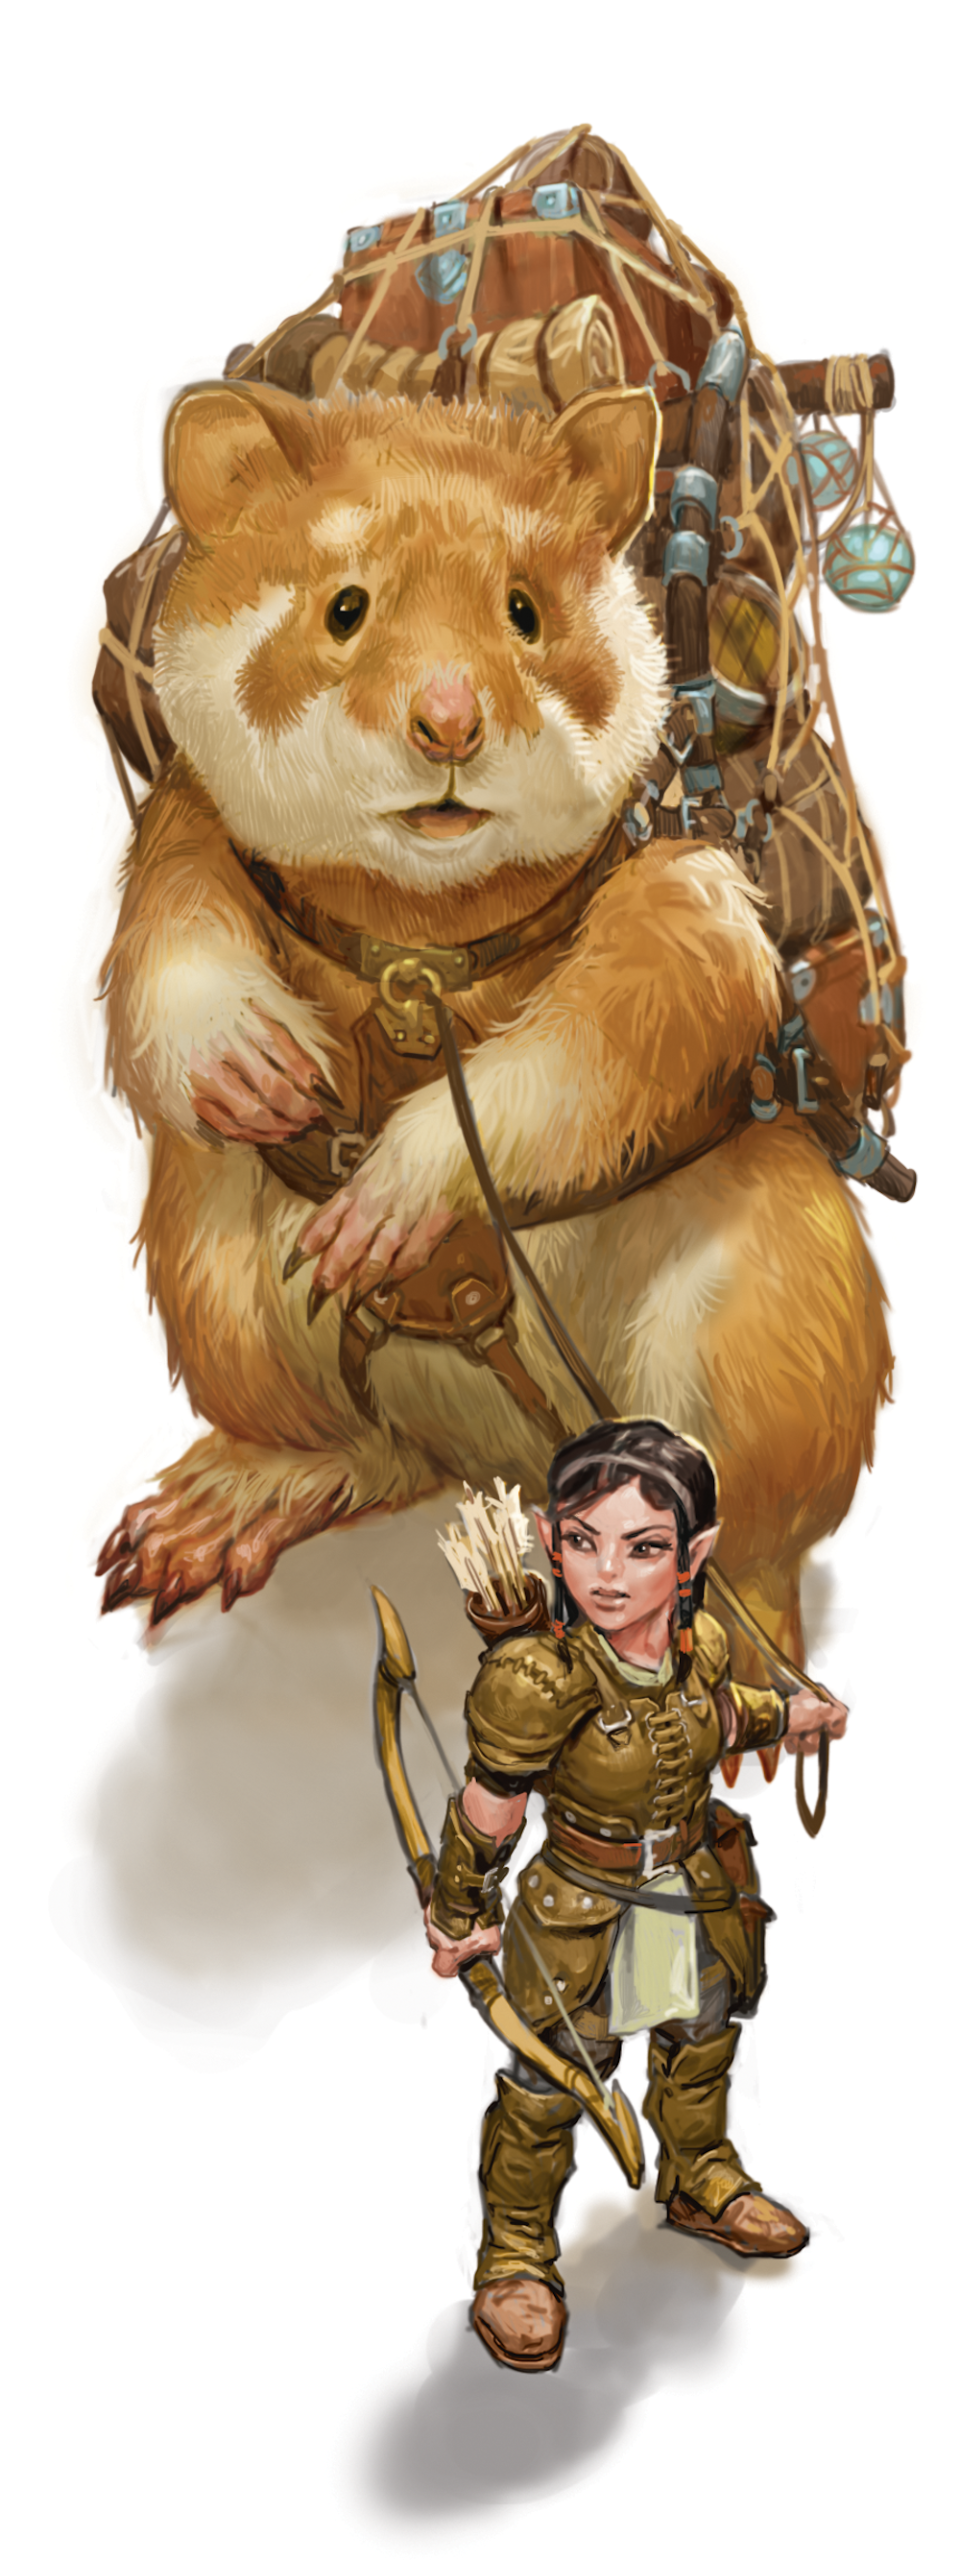 A Giant Space Hamster. (Image: Wizards of the Coast)